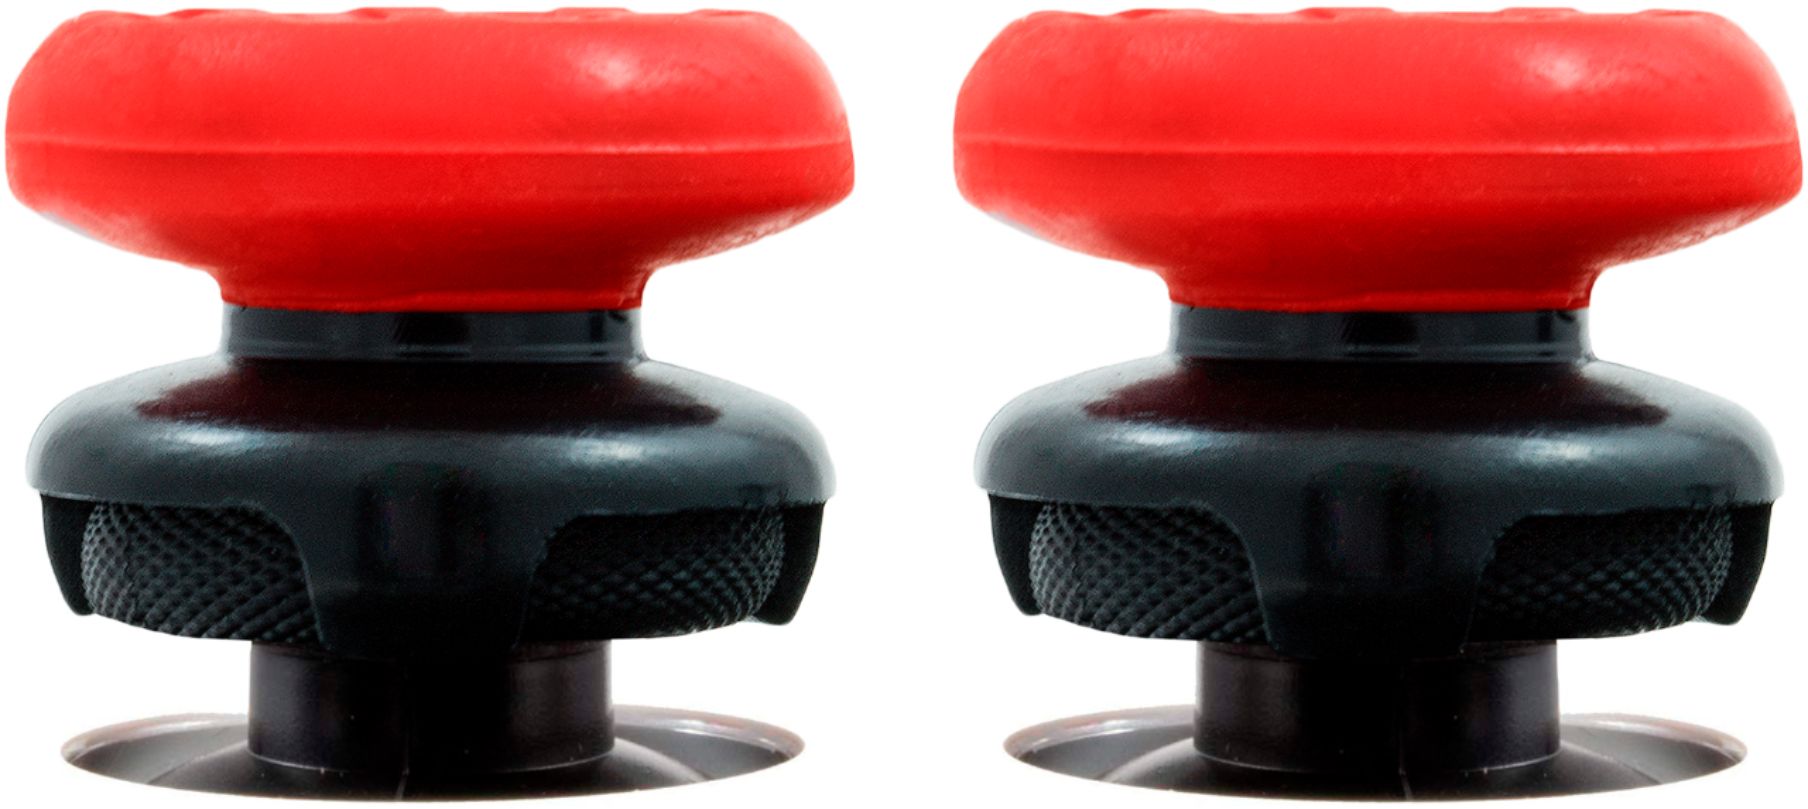 Angle View: KontrolFreek - FPS Freek Inferno 4 Prong Performance Thumbsticks for PS5 and PS4